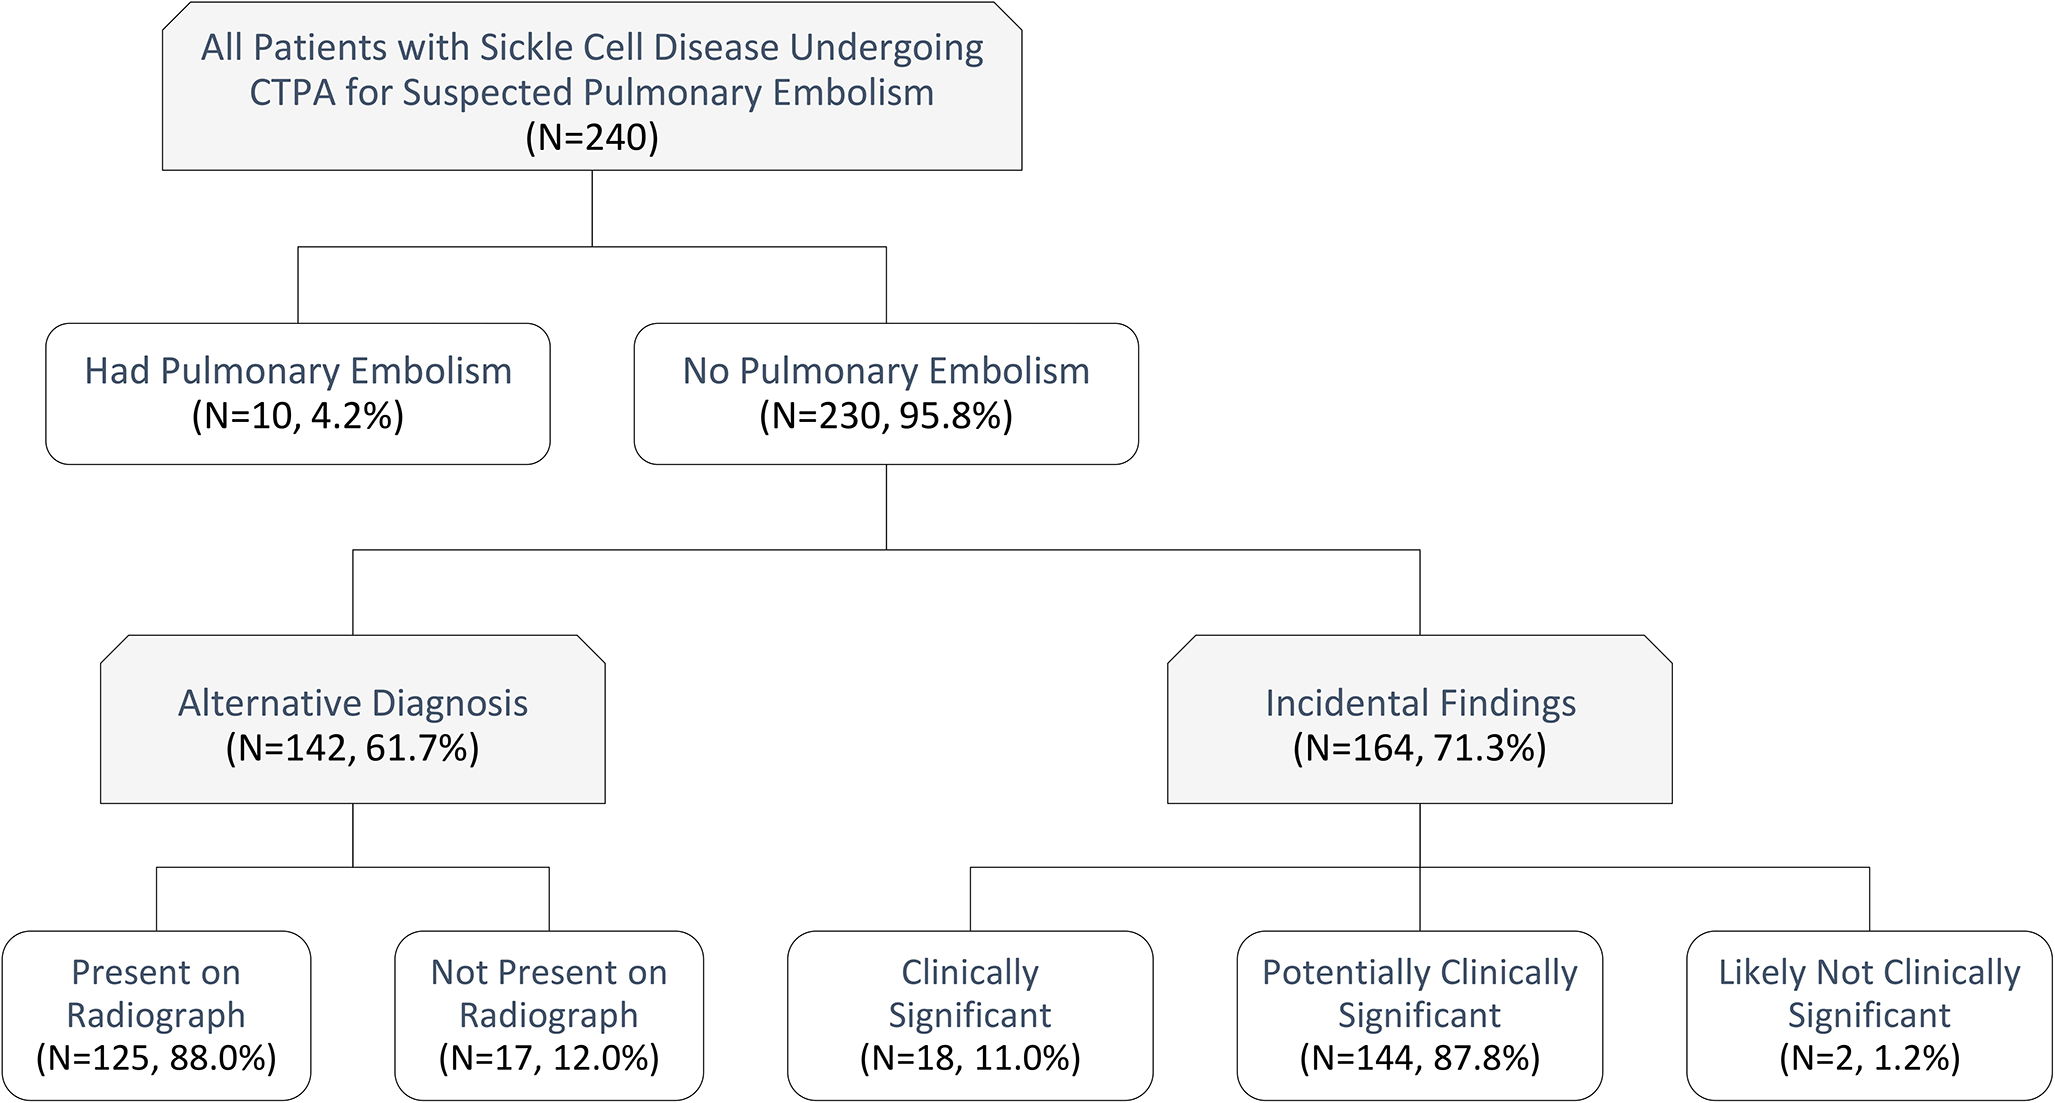 Beyond pulmonary embolism: Alternative diagnosis and incidental findings on CT pulmonary angiography in sickle cell disease